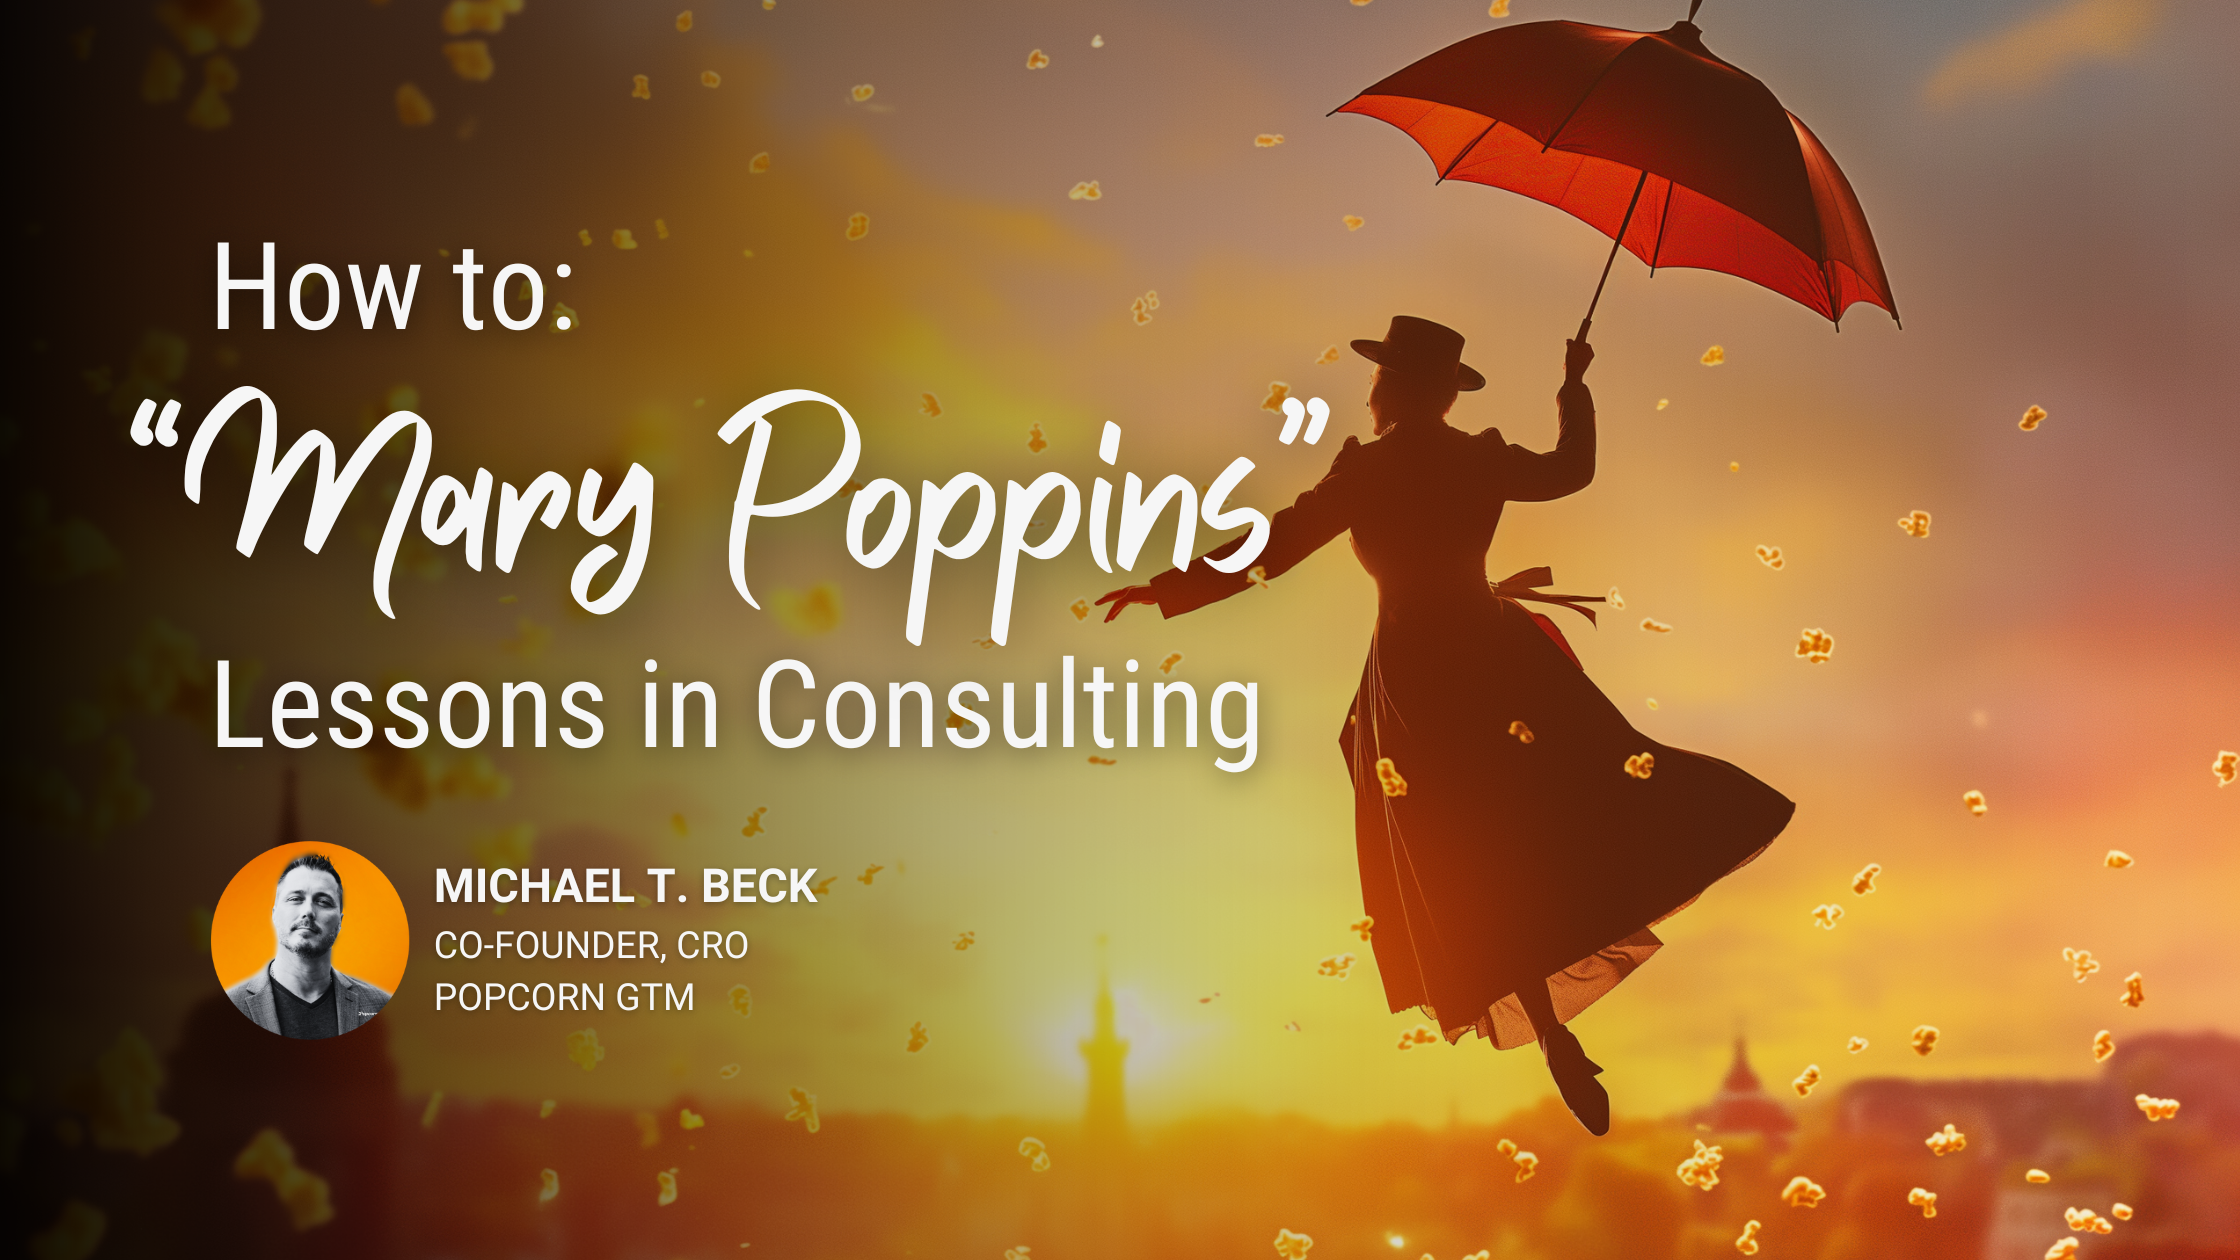 Mary Poppins and a Lesson in Consulting